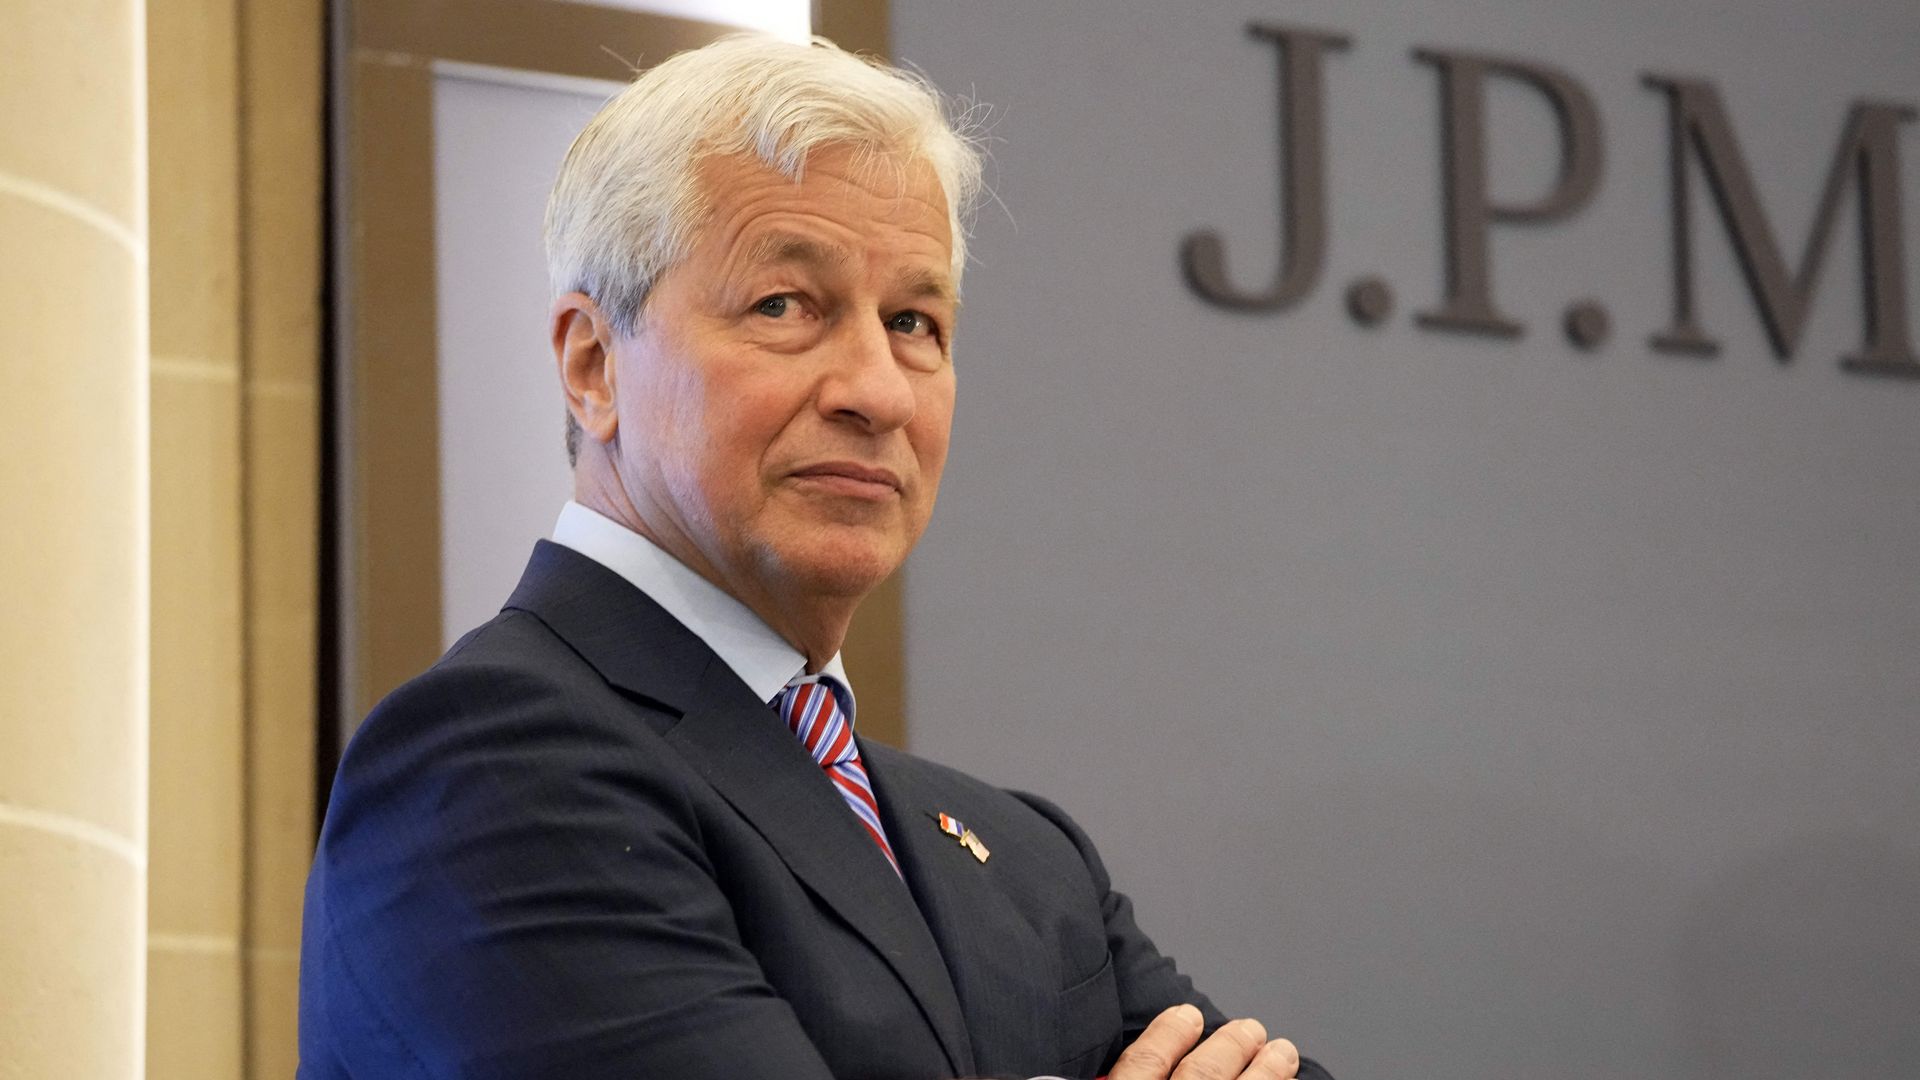 Jamie Dimon is seen standing with his arms crossed.